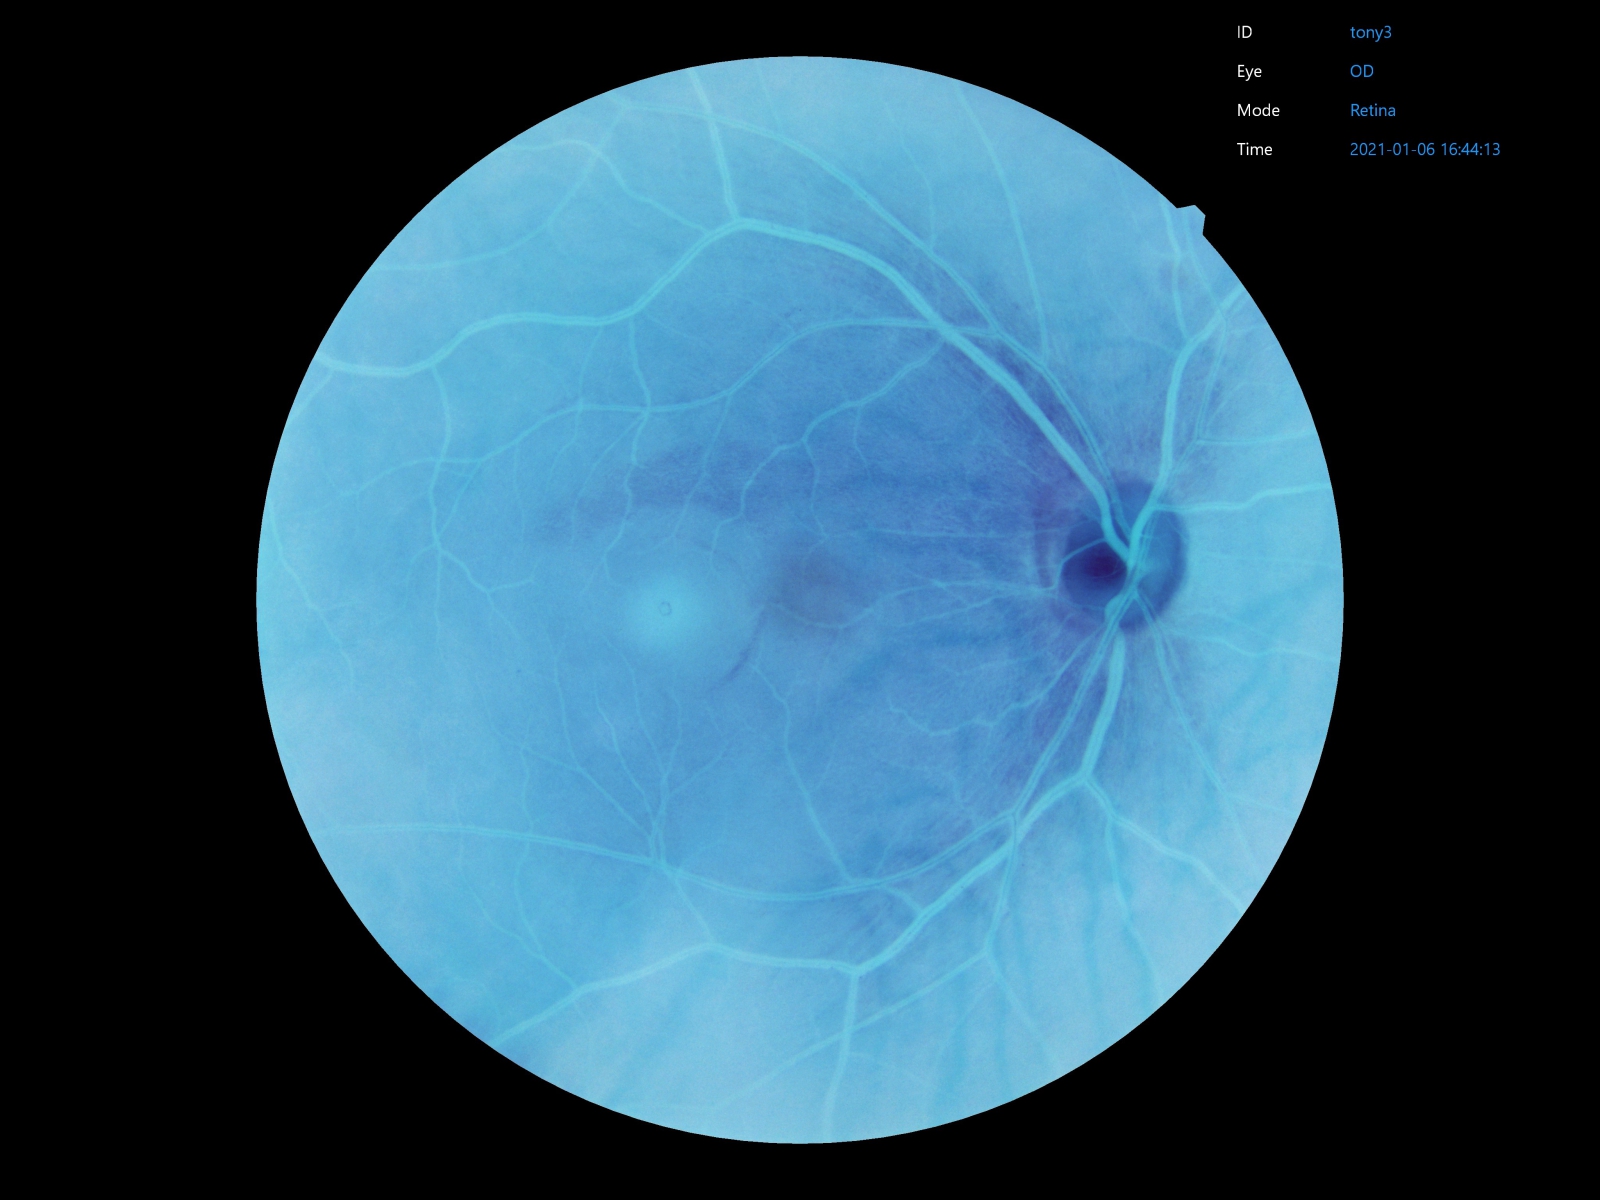 Crystalvue retinal camera provides Built-In Filters for retinal images